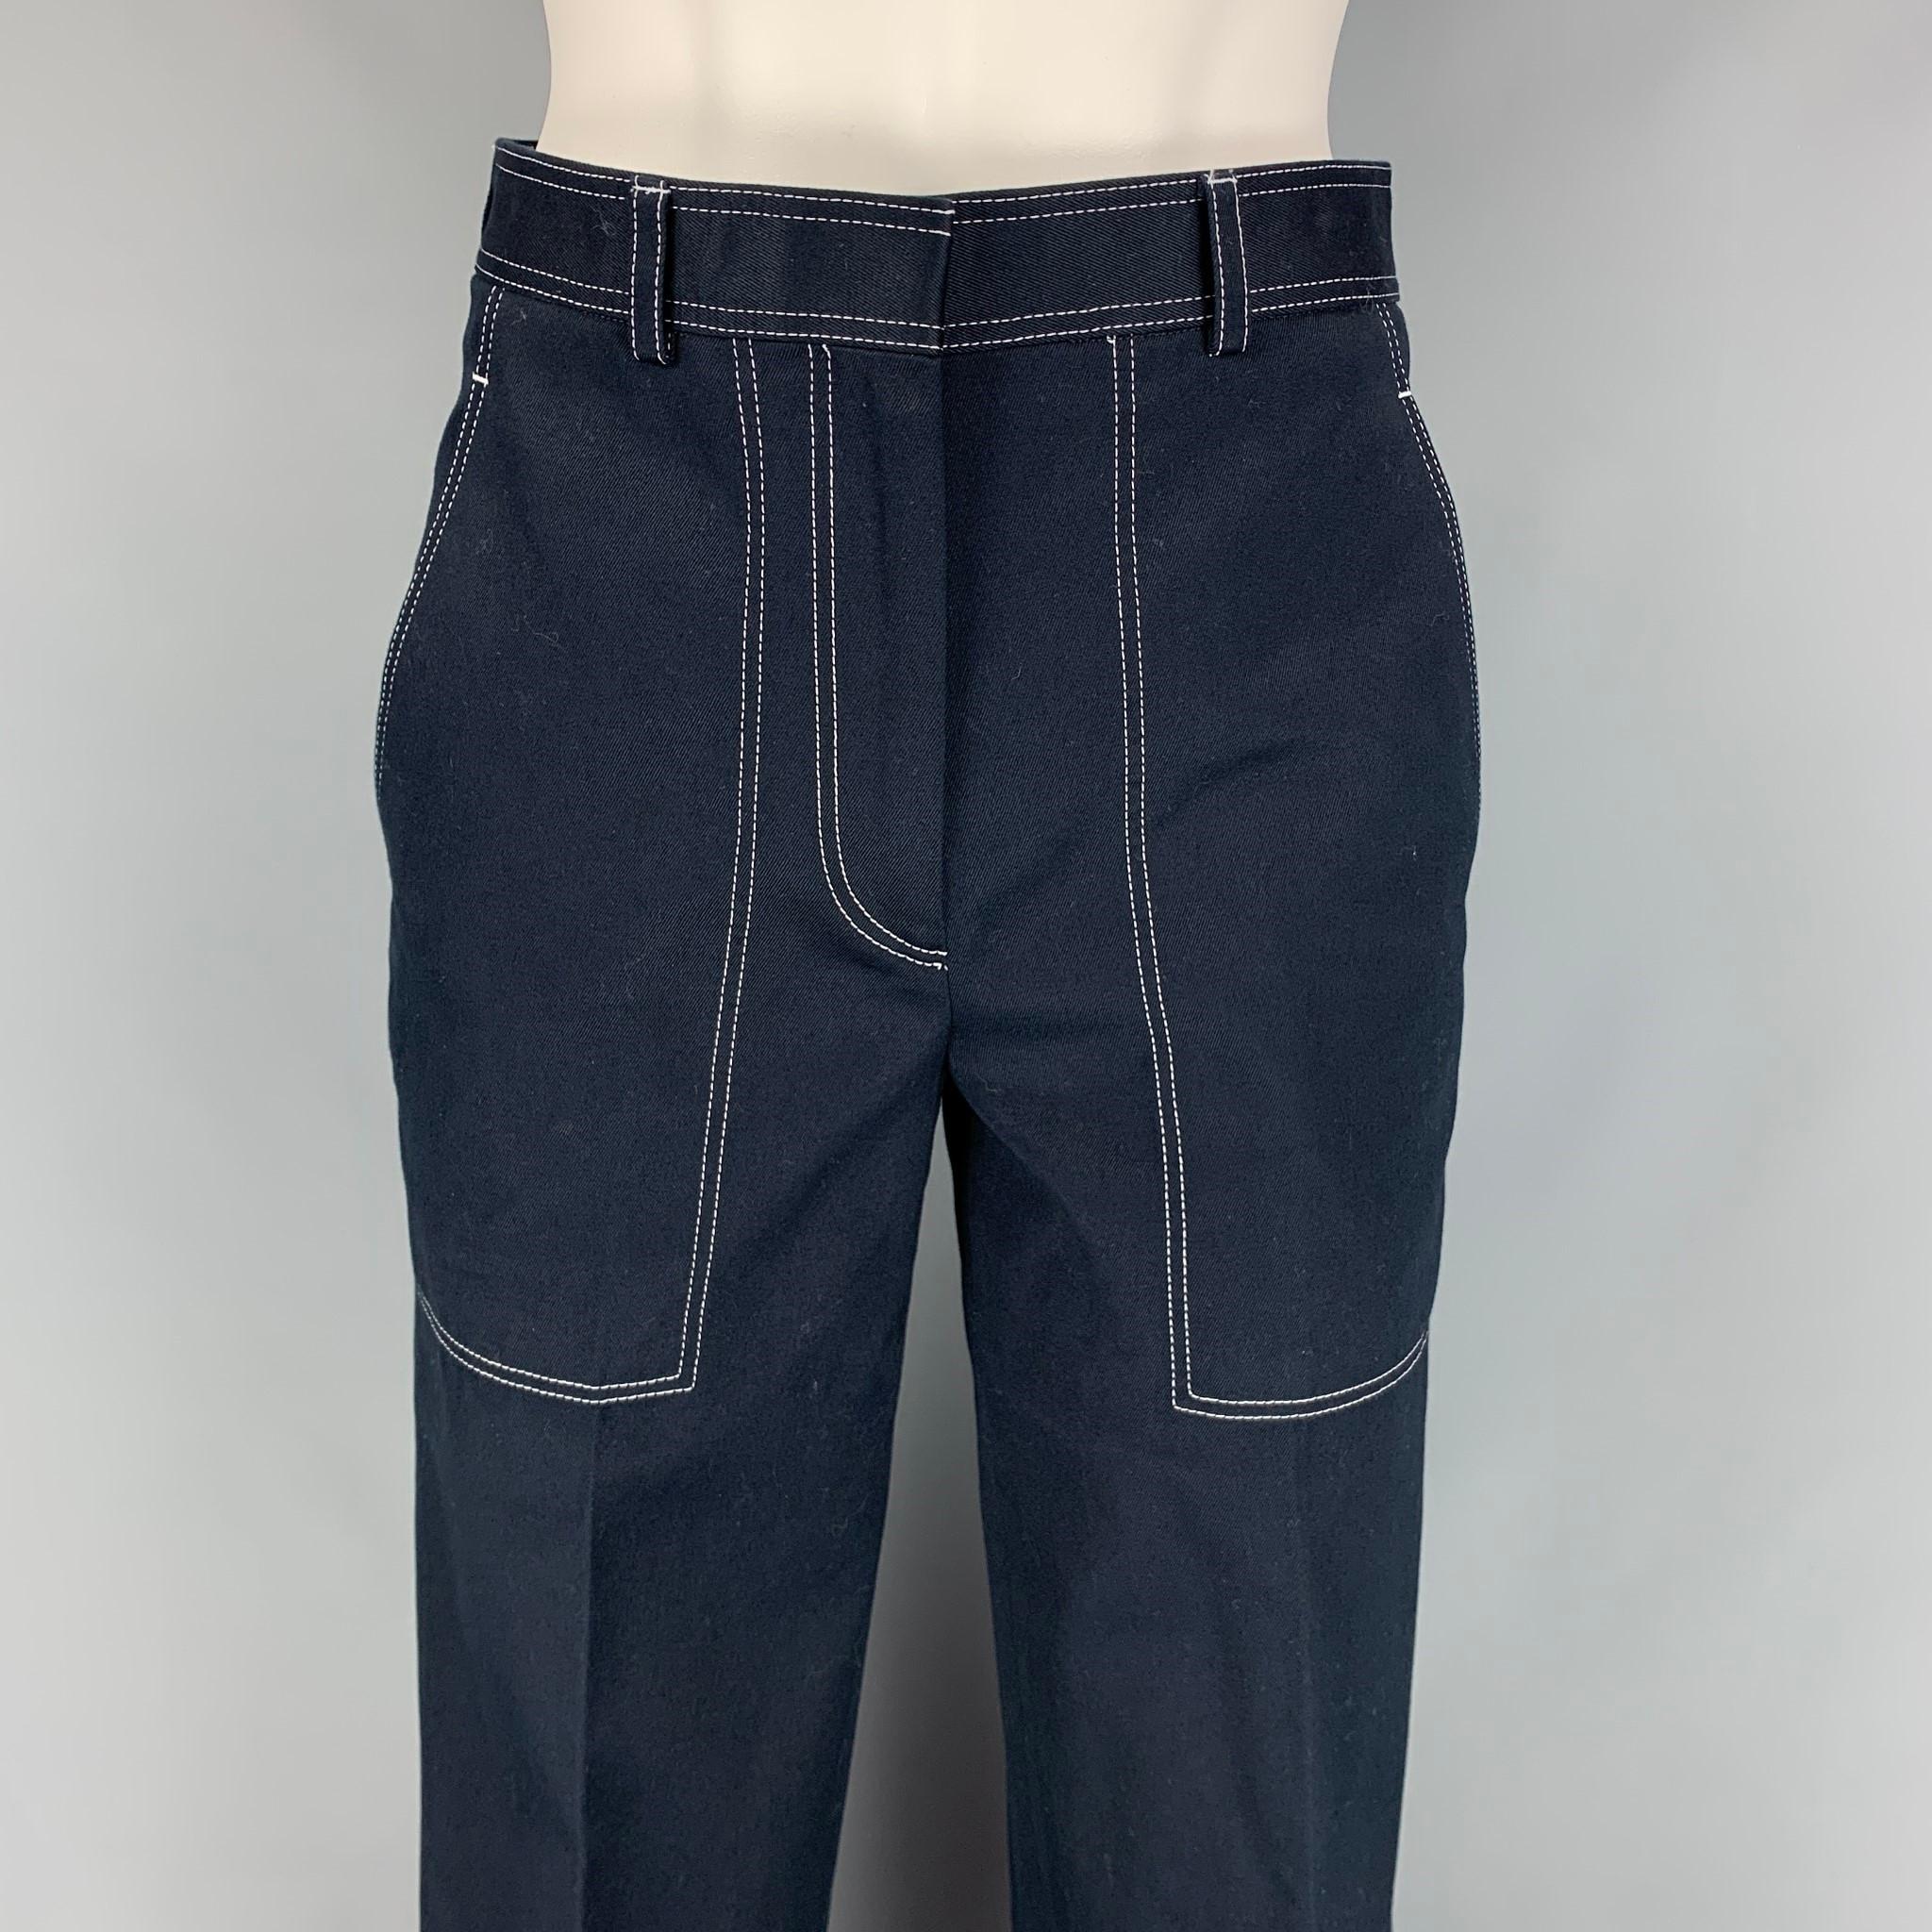 THOM BROWNE casual pants comes in a navy cotton featuring a high waist, cropped style, contrasts stitching, signature three-stripe logo, front tab, and a zip fly closure. Made in Italy. 

Excellent Pre-Owned Condition.
Marked: 36
Original Retail